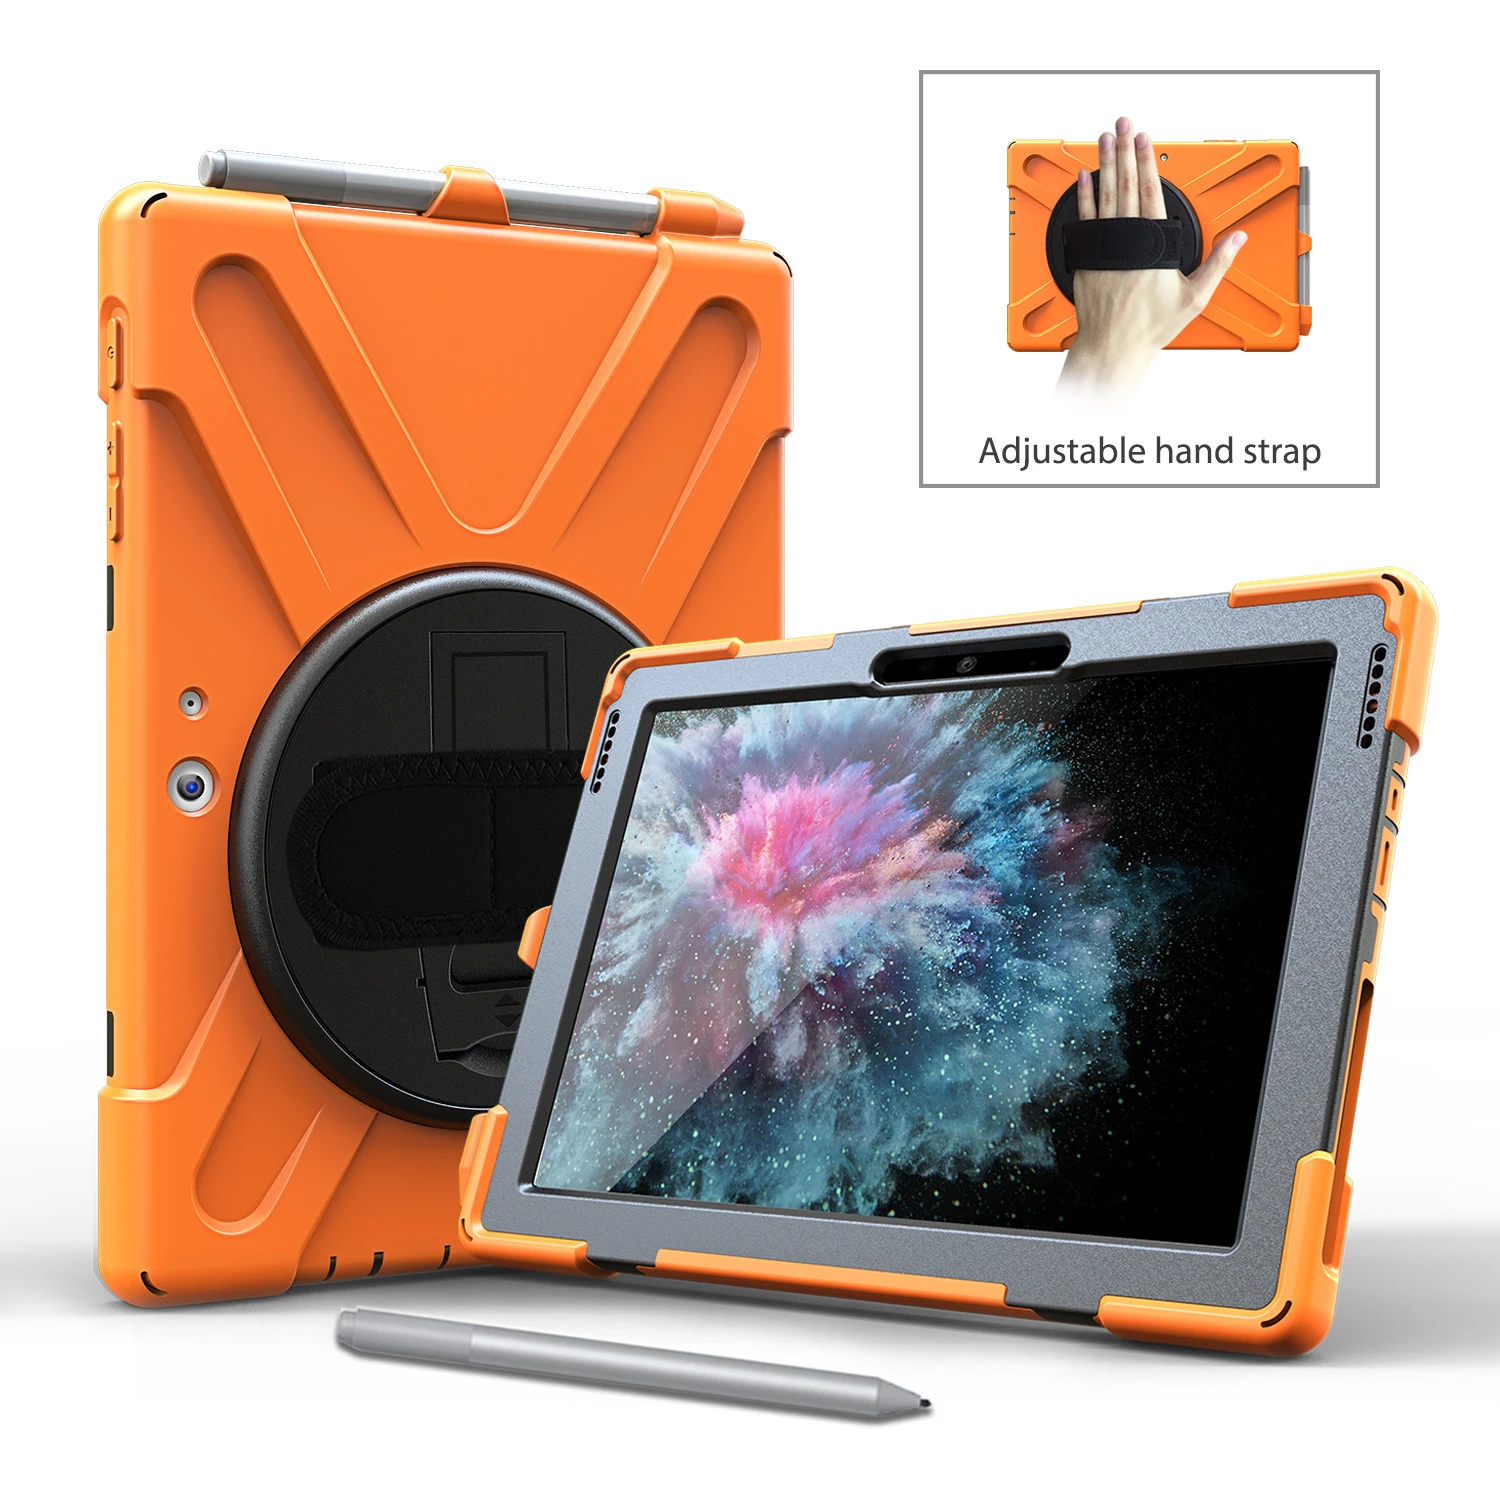 Yapears Rugged Tablet Cover With Stand For Surface go, Durable Impact Resistant Case with pencil holder